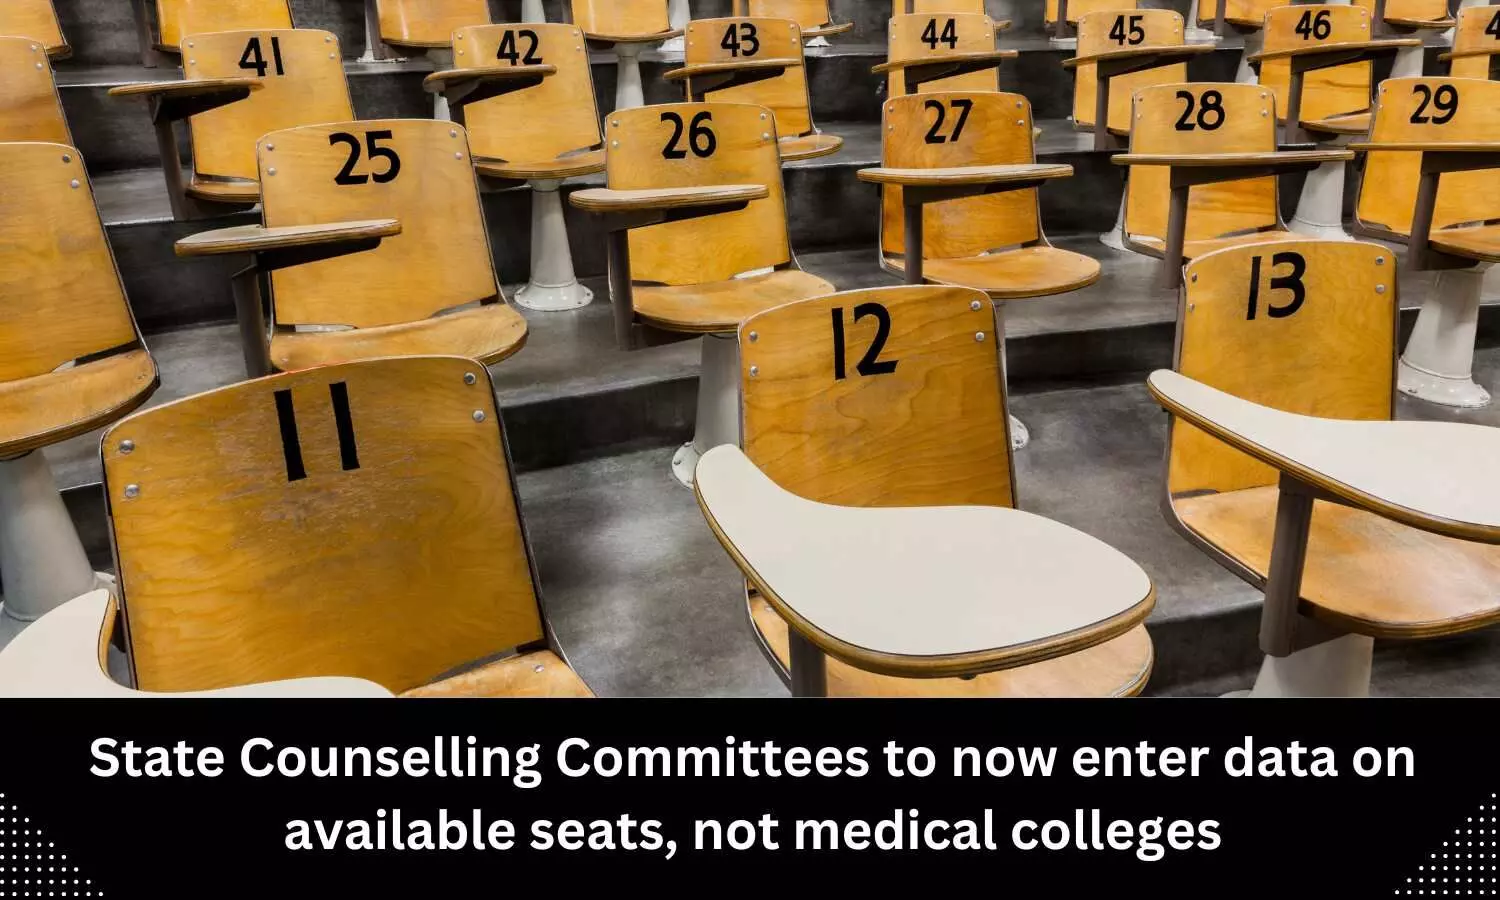 State counselling committees to now enter data on available seats, not medical colleges